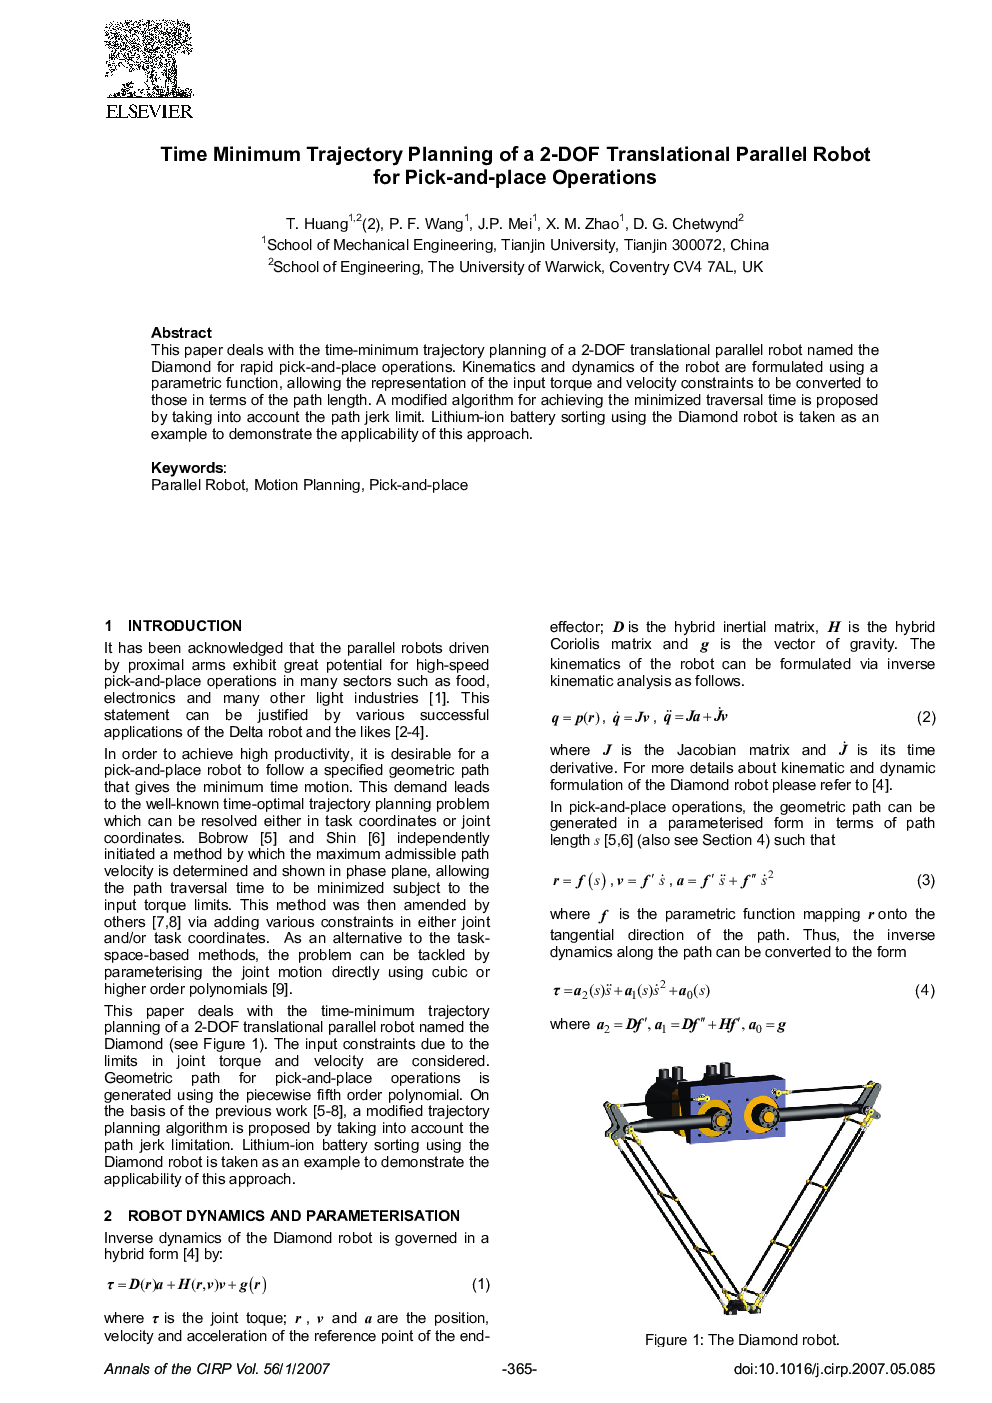 Time Minimum Trajectory Planning of a 2-DOF Translational Parallel Robot for Pick-and-place Operations